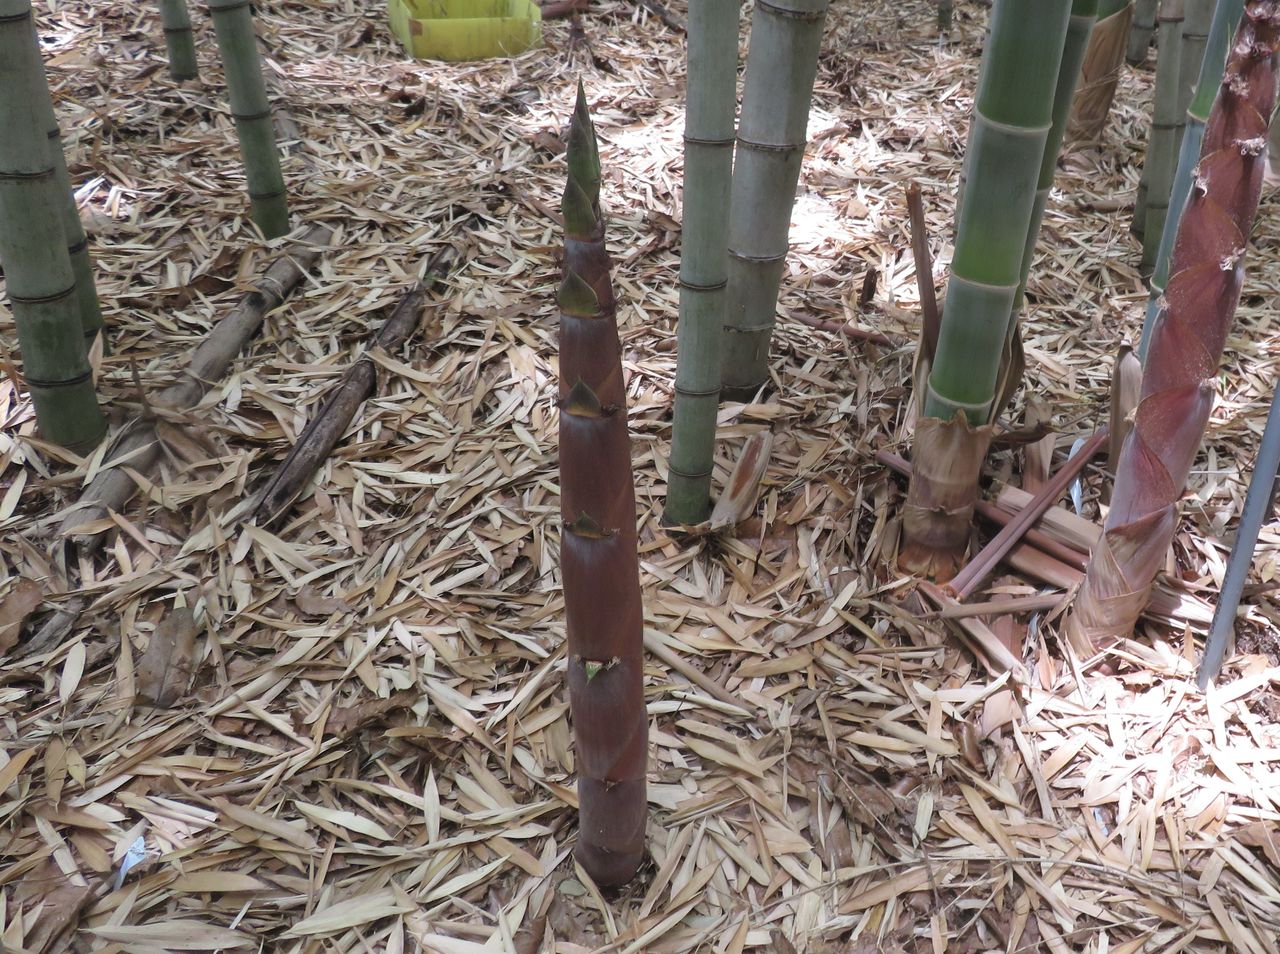 Shoots of hachiku poke out of the ground in a bamboo stand in Kyoto Prefecture.